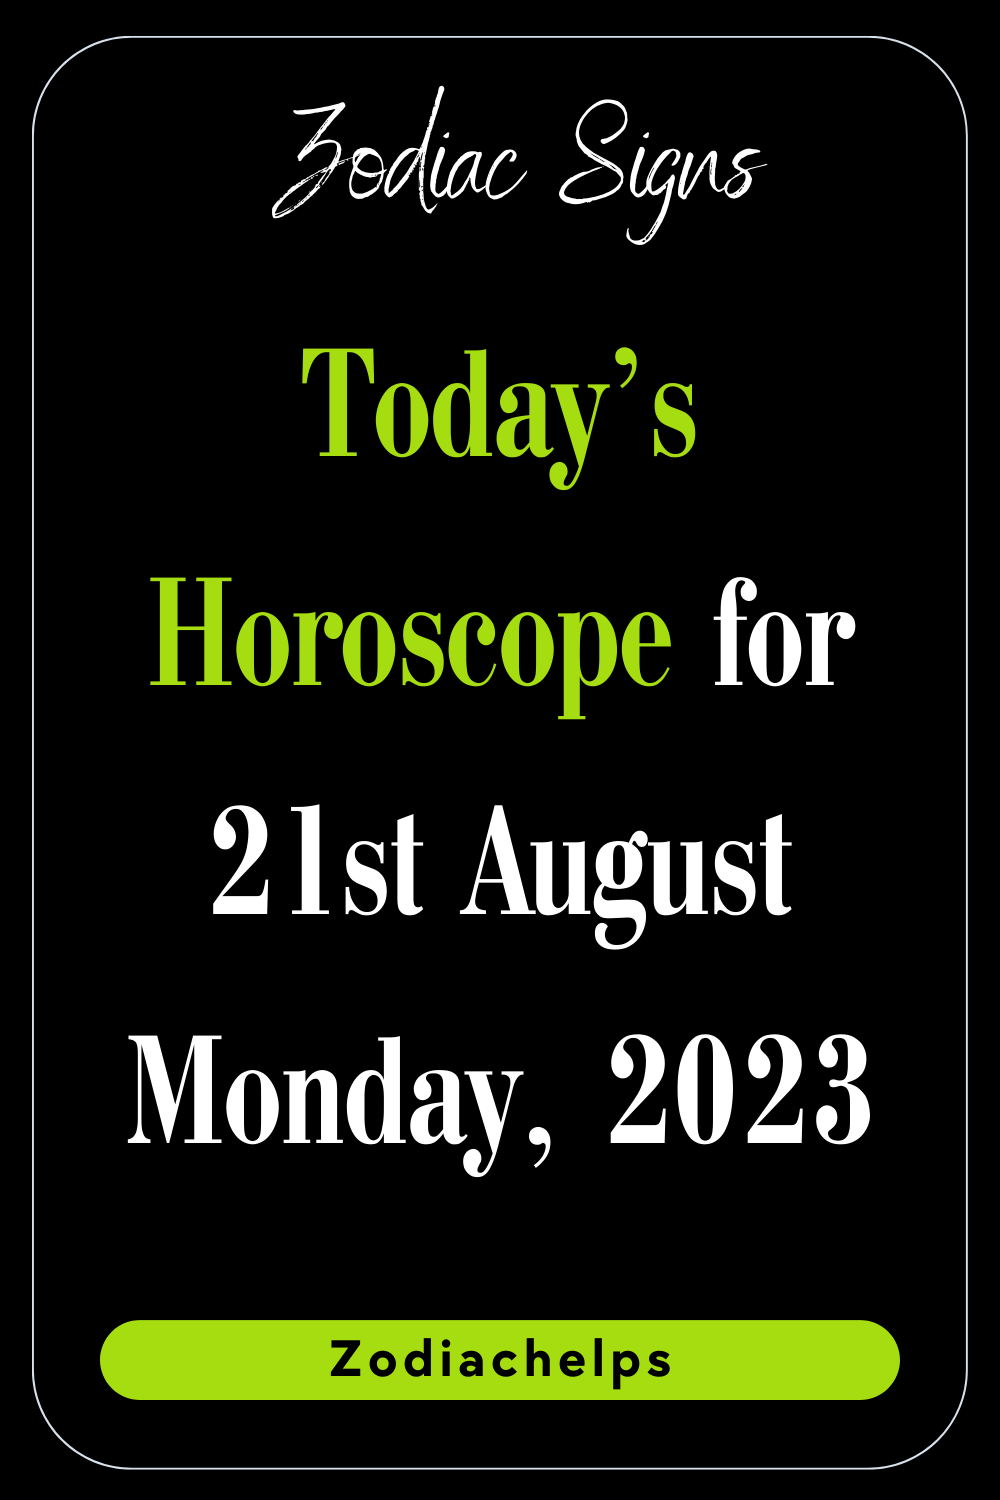 Today’s Horoscope for 21st August Monday, 2023